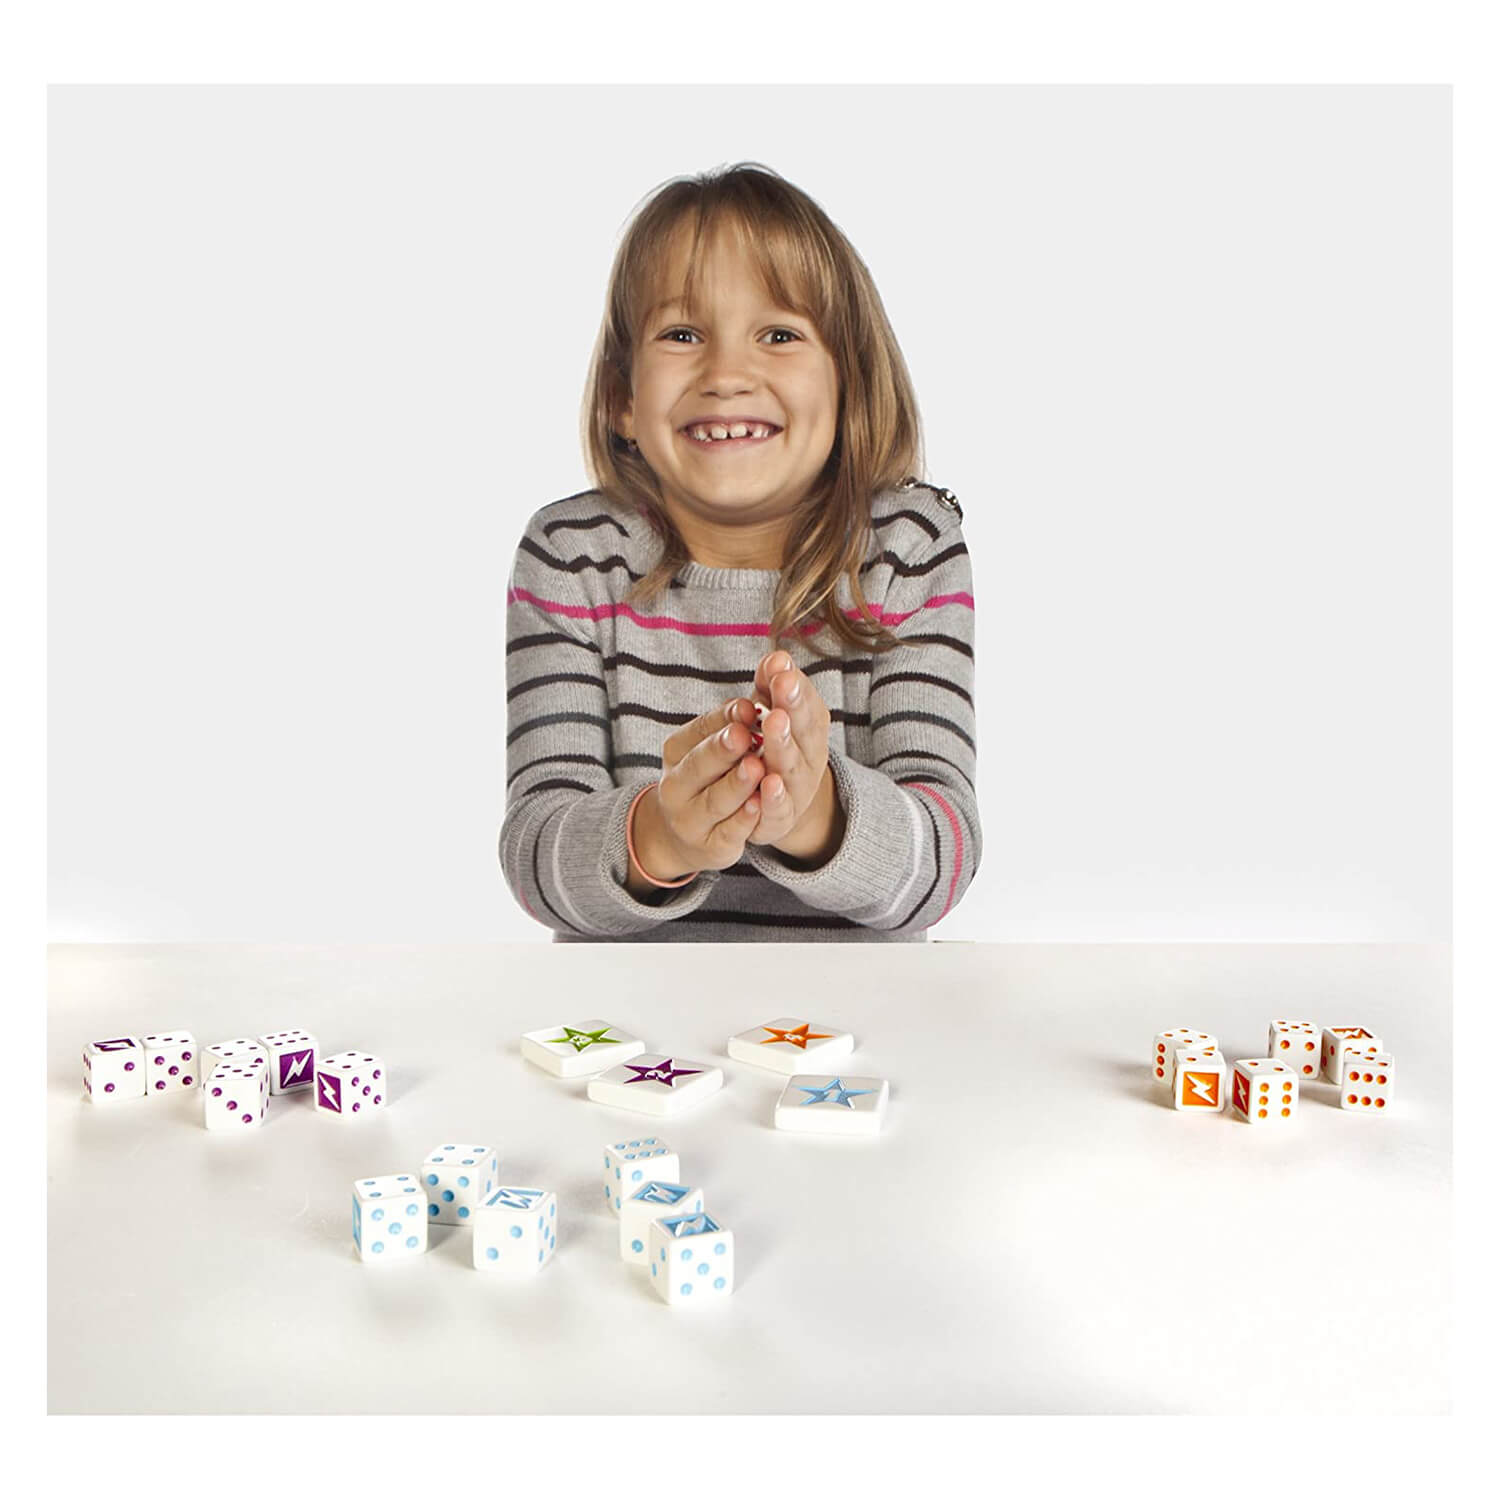 Little girl playing with dice included.